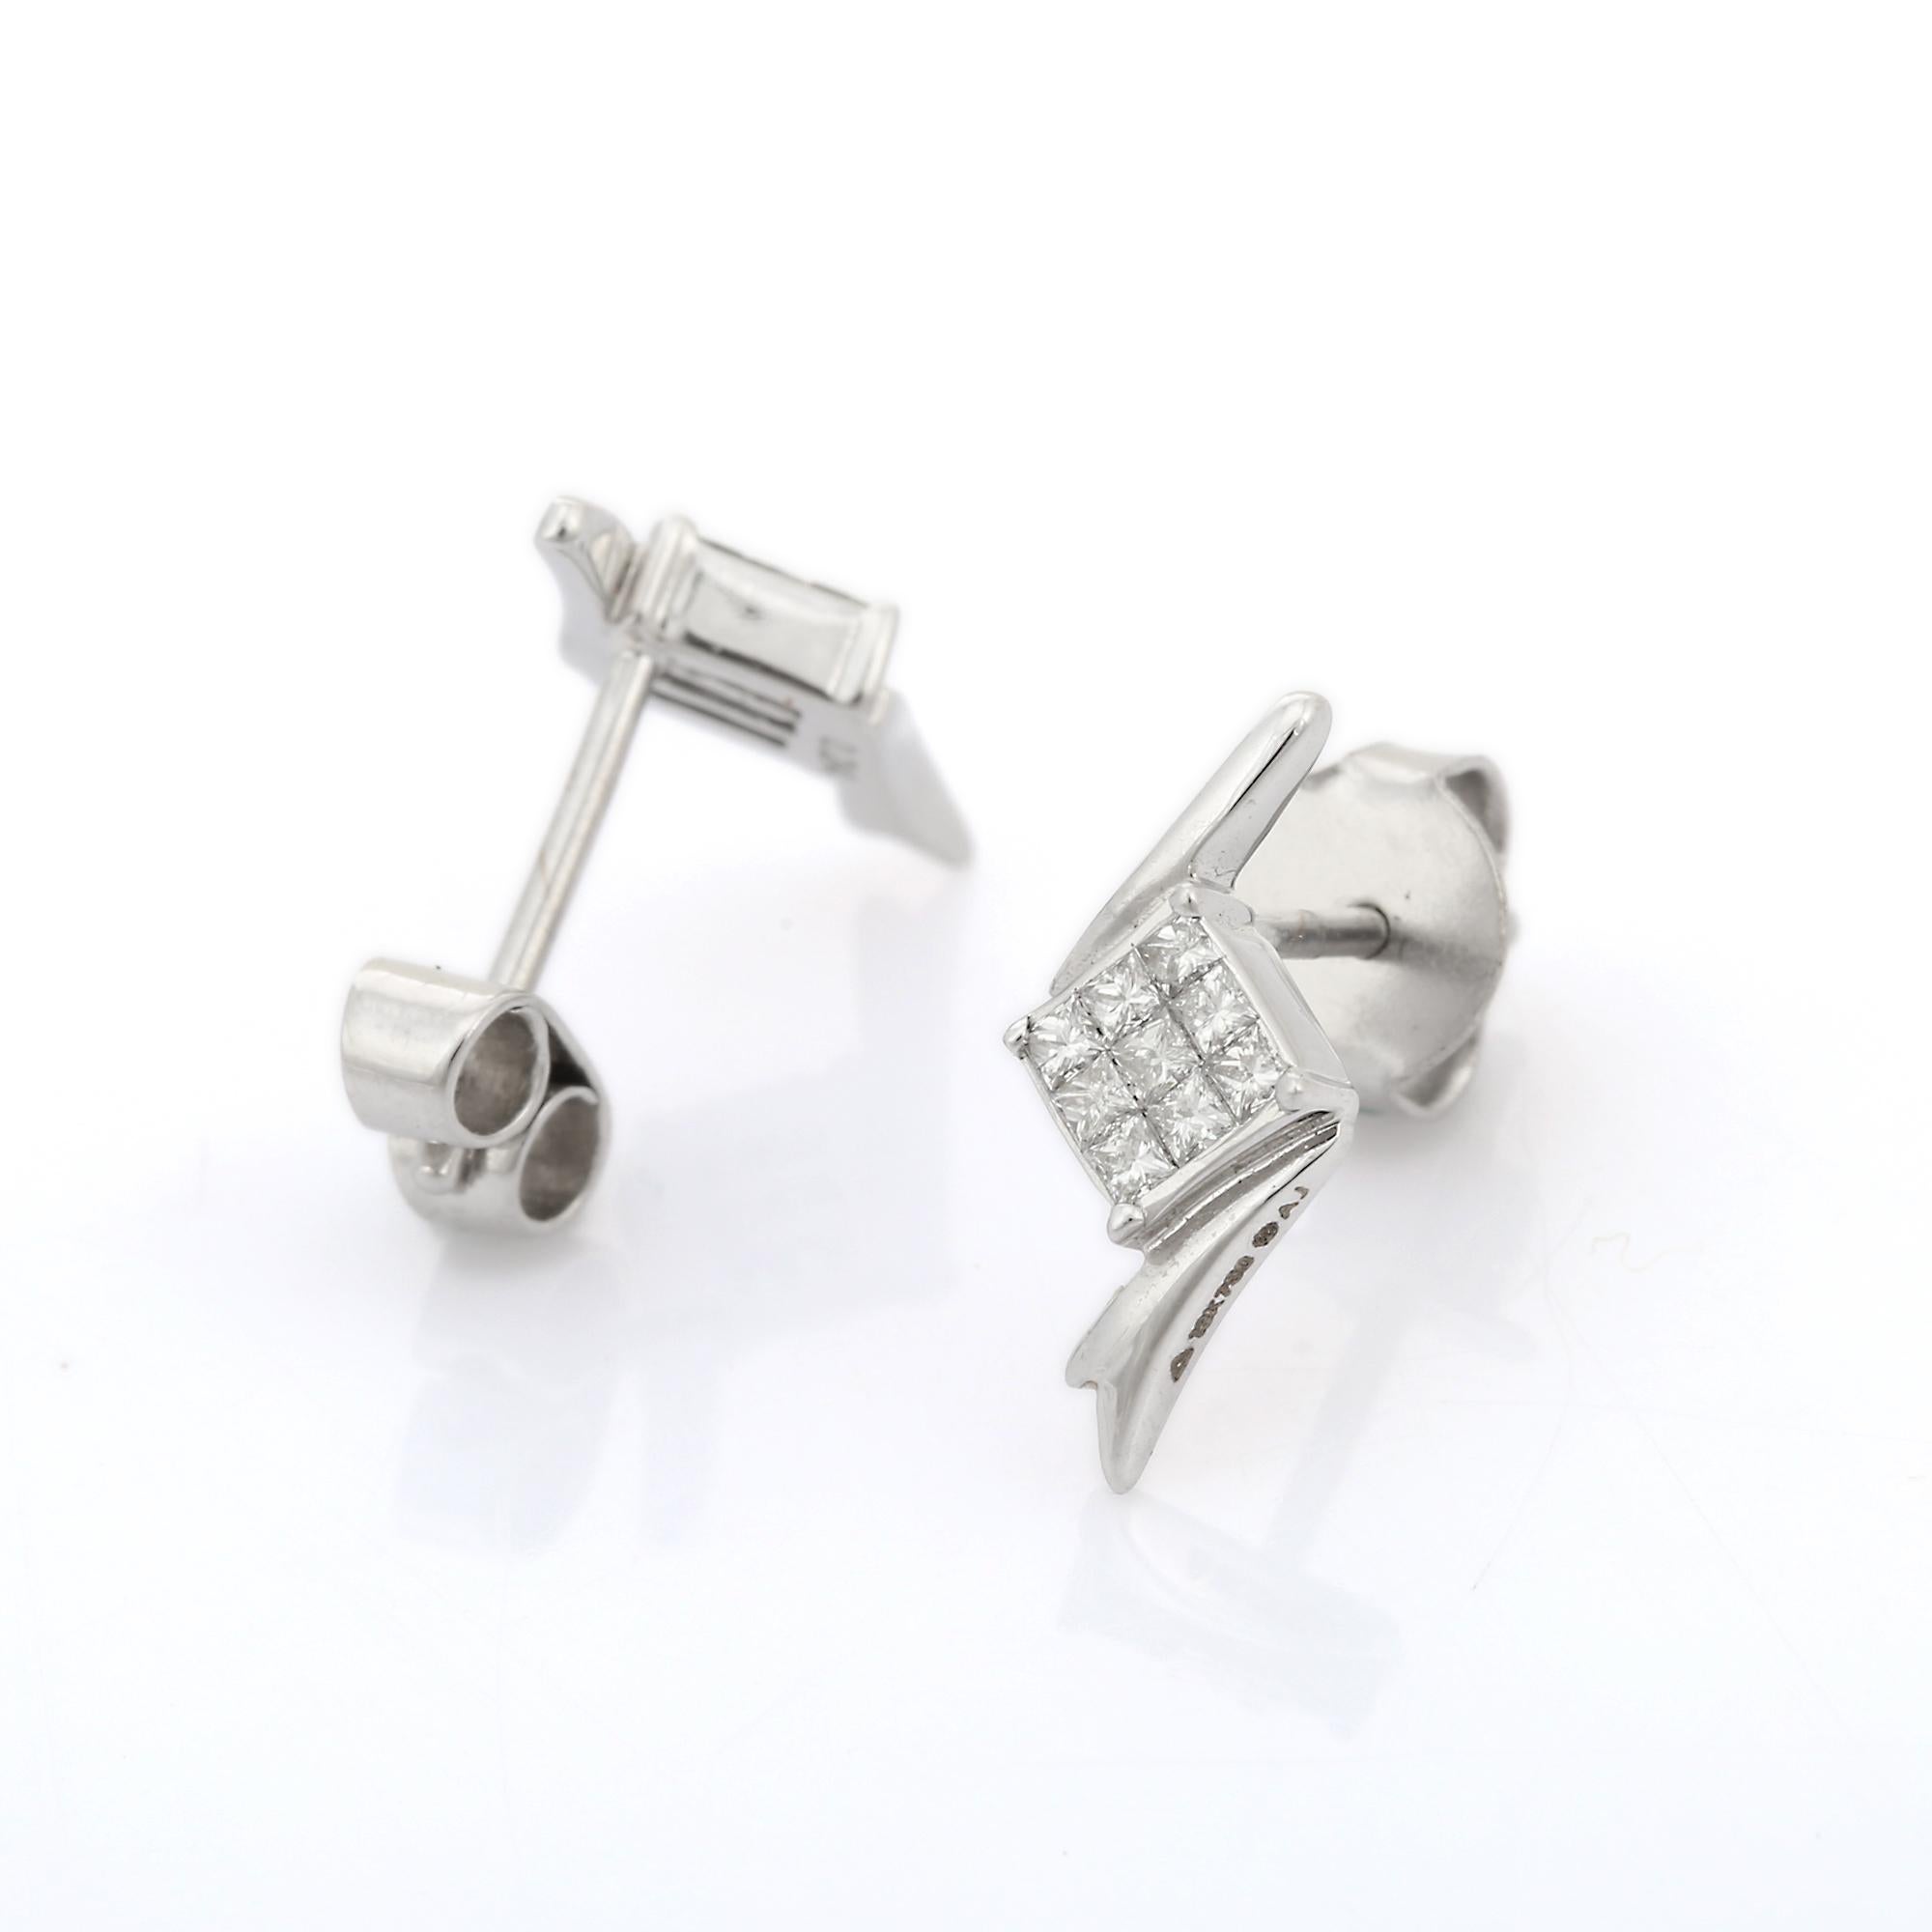 Square Cut Natural Diamond Stud Earrings in 18k Gold. Studs create a subtle beauty while showcasing the illuminating diamonds making a statement. These gorgeous earrings will effortlessly make you stand out. 
April birthstone diamond brings love,